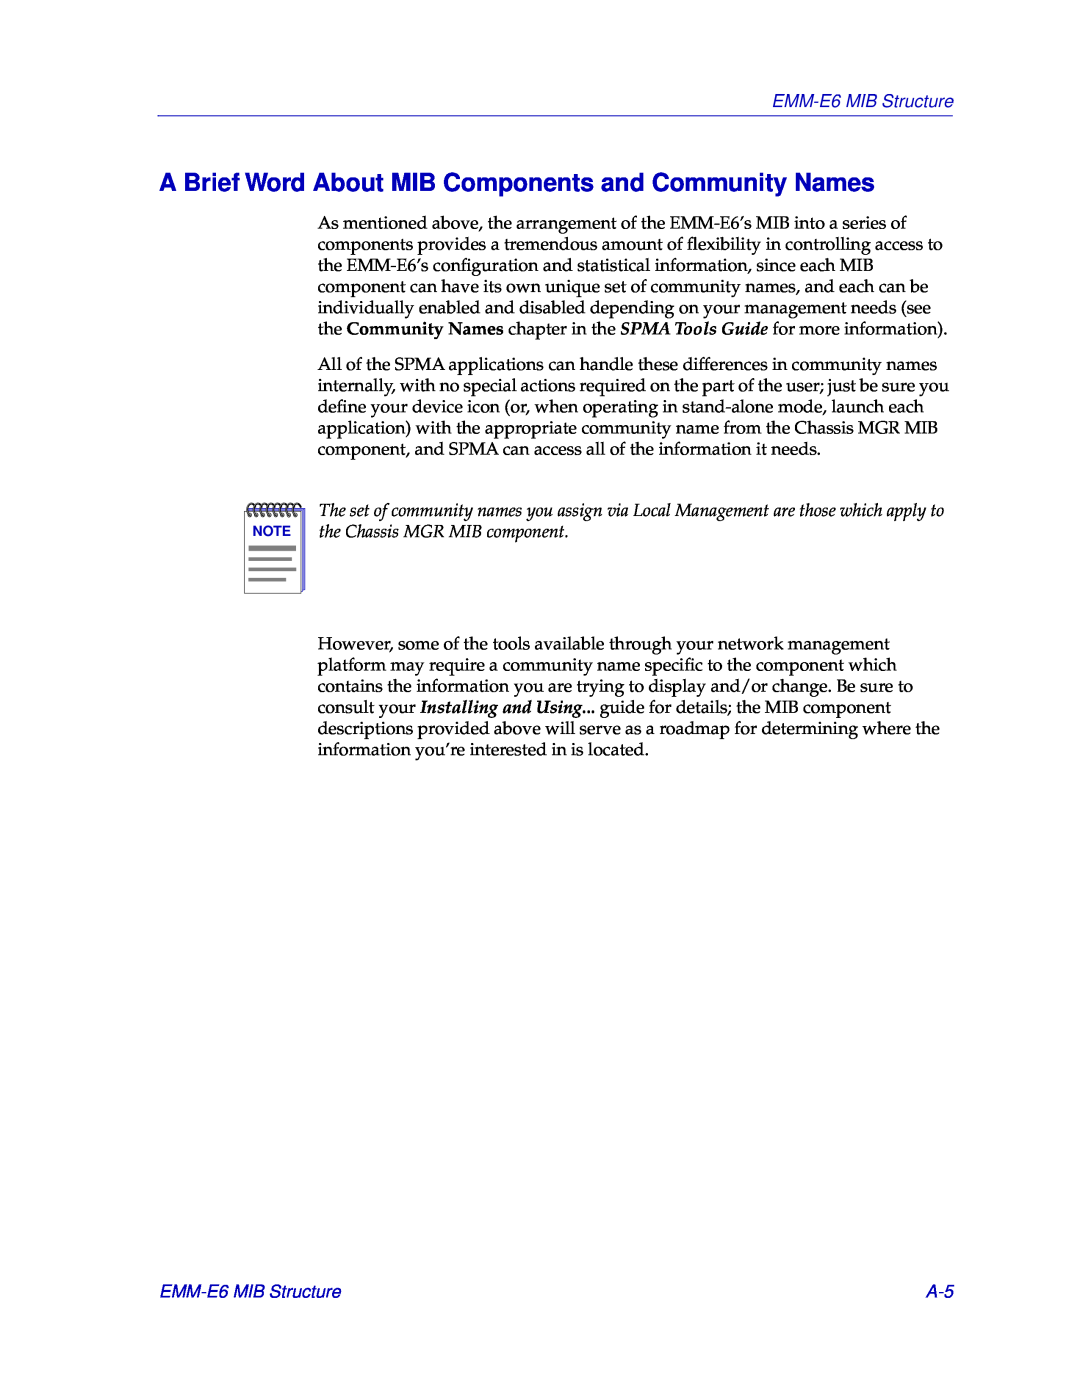 Cabletron Systems manual A Brief Word About MIB Components and Community Names, EMM-E6 MIB Structure 